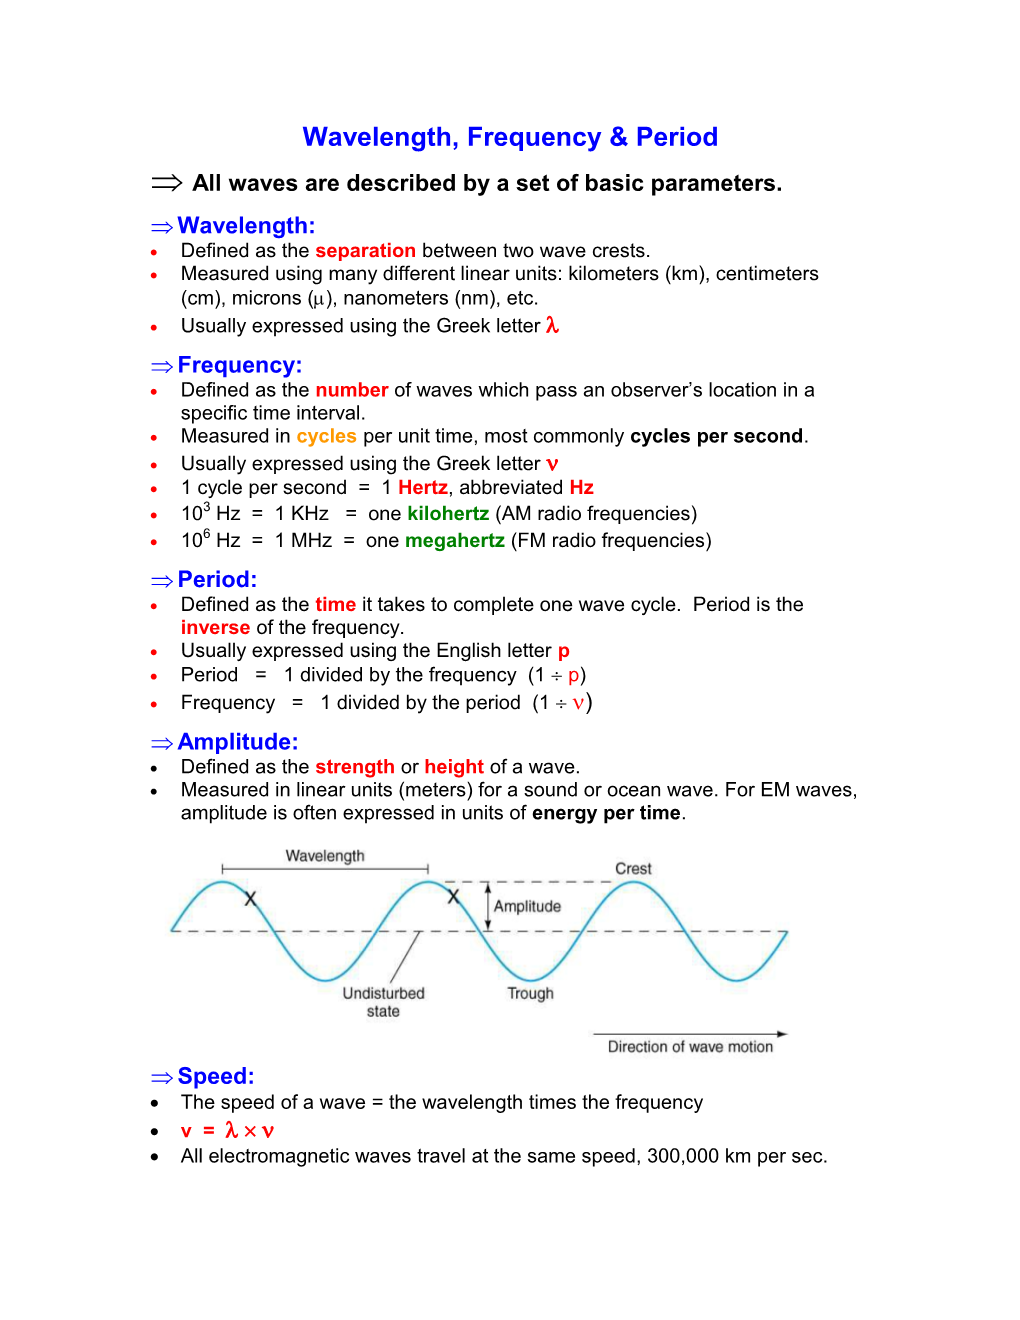 Wavelength, Frequency and Period